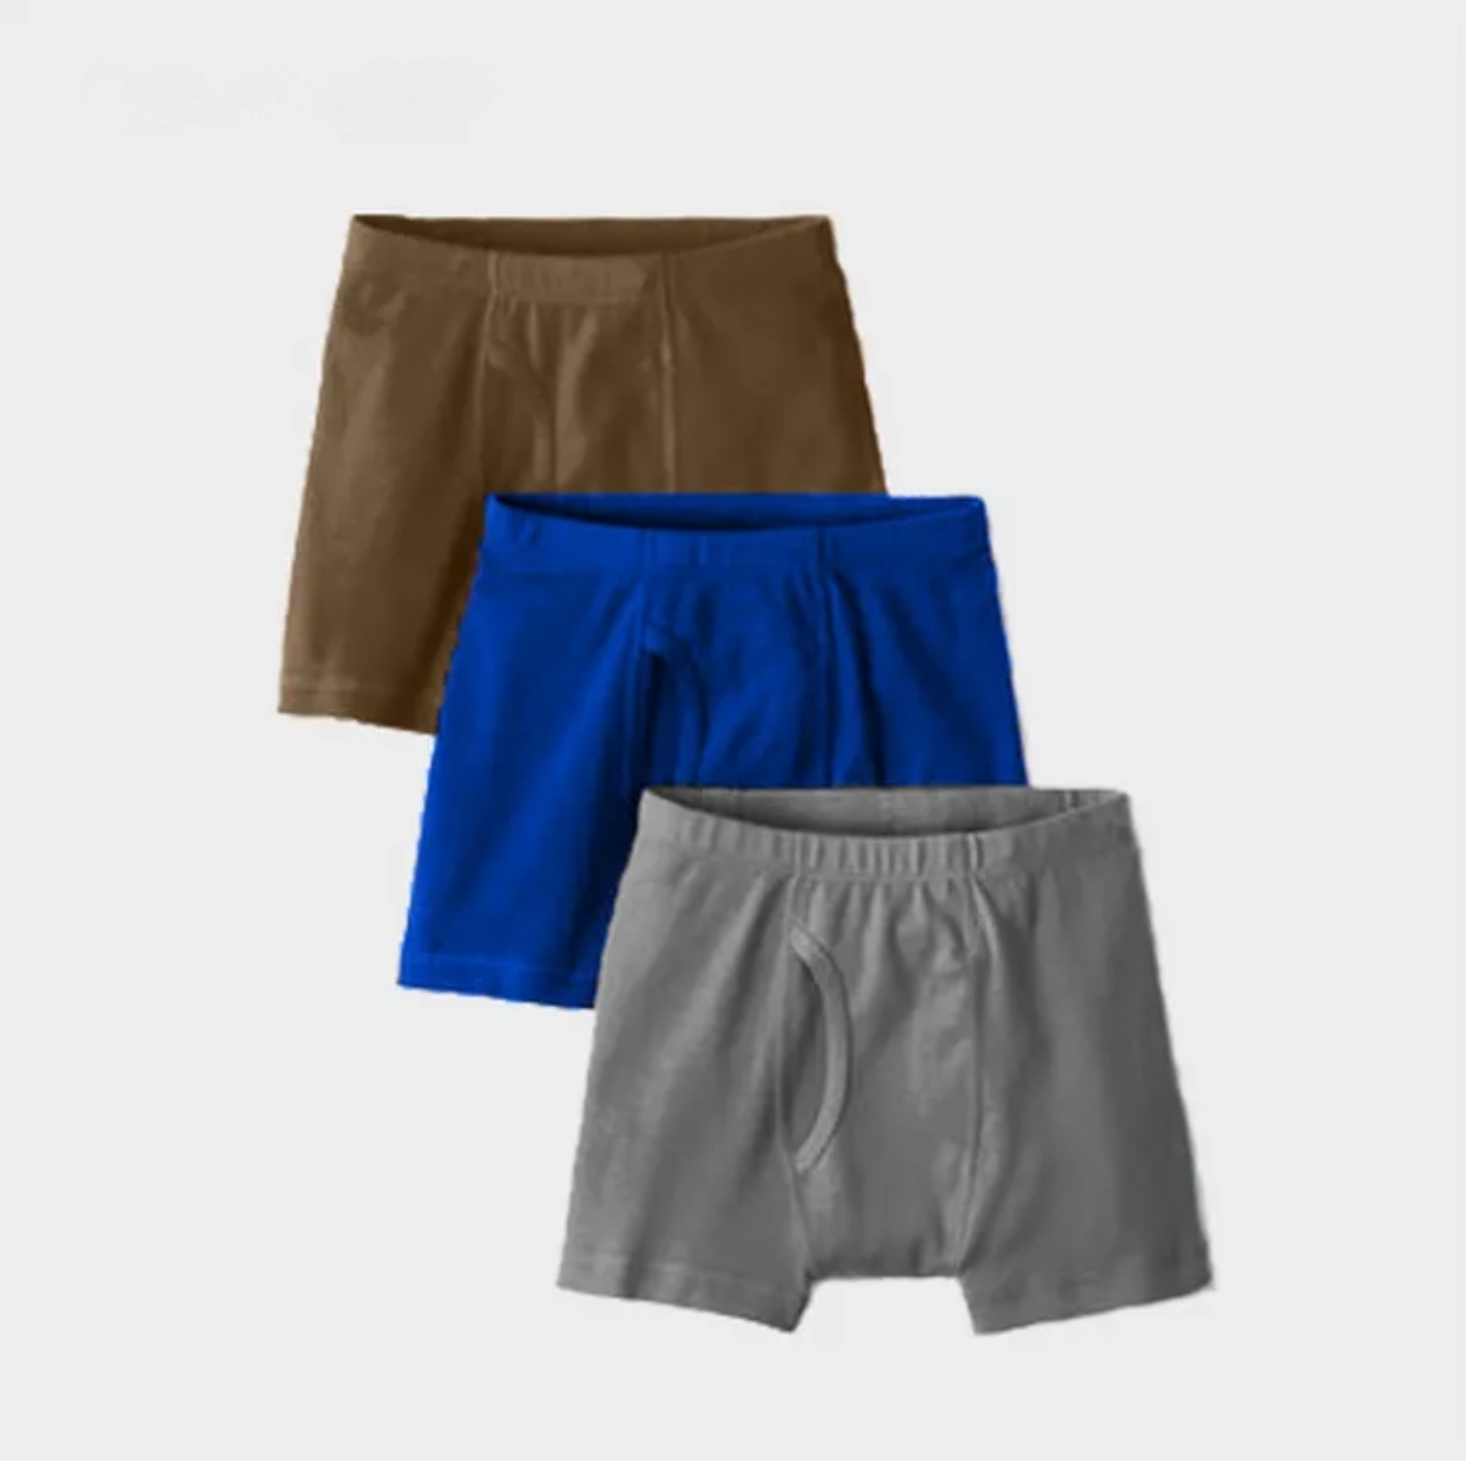 Boxer For Men Pack of 3  Random Colors  Comfort and Quality Combined